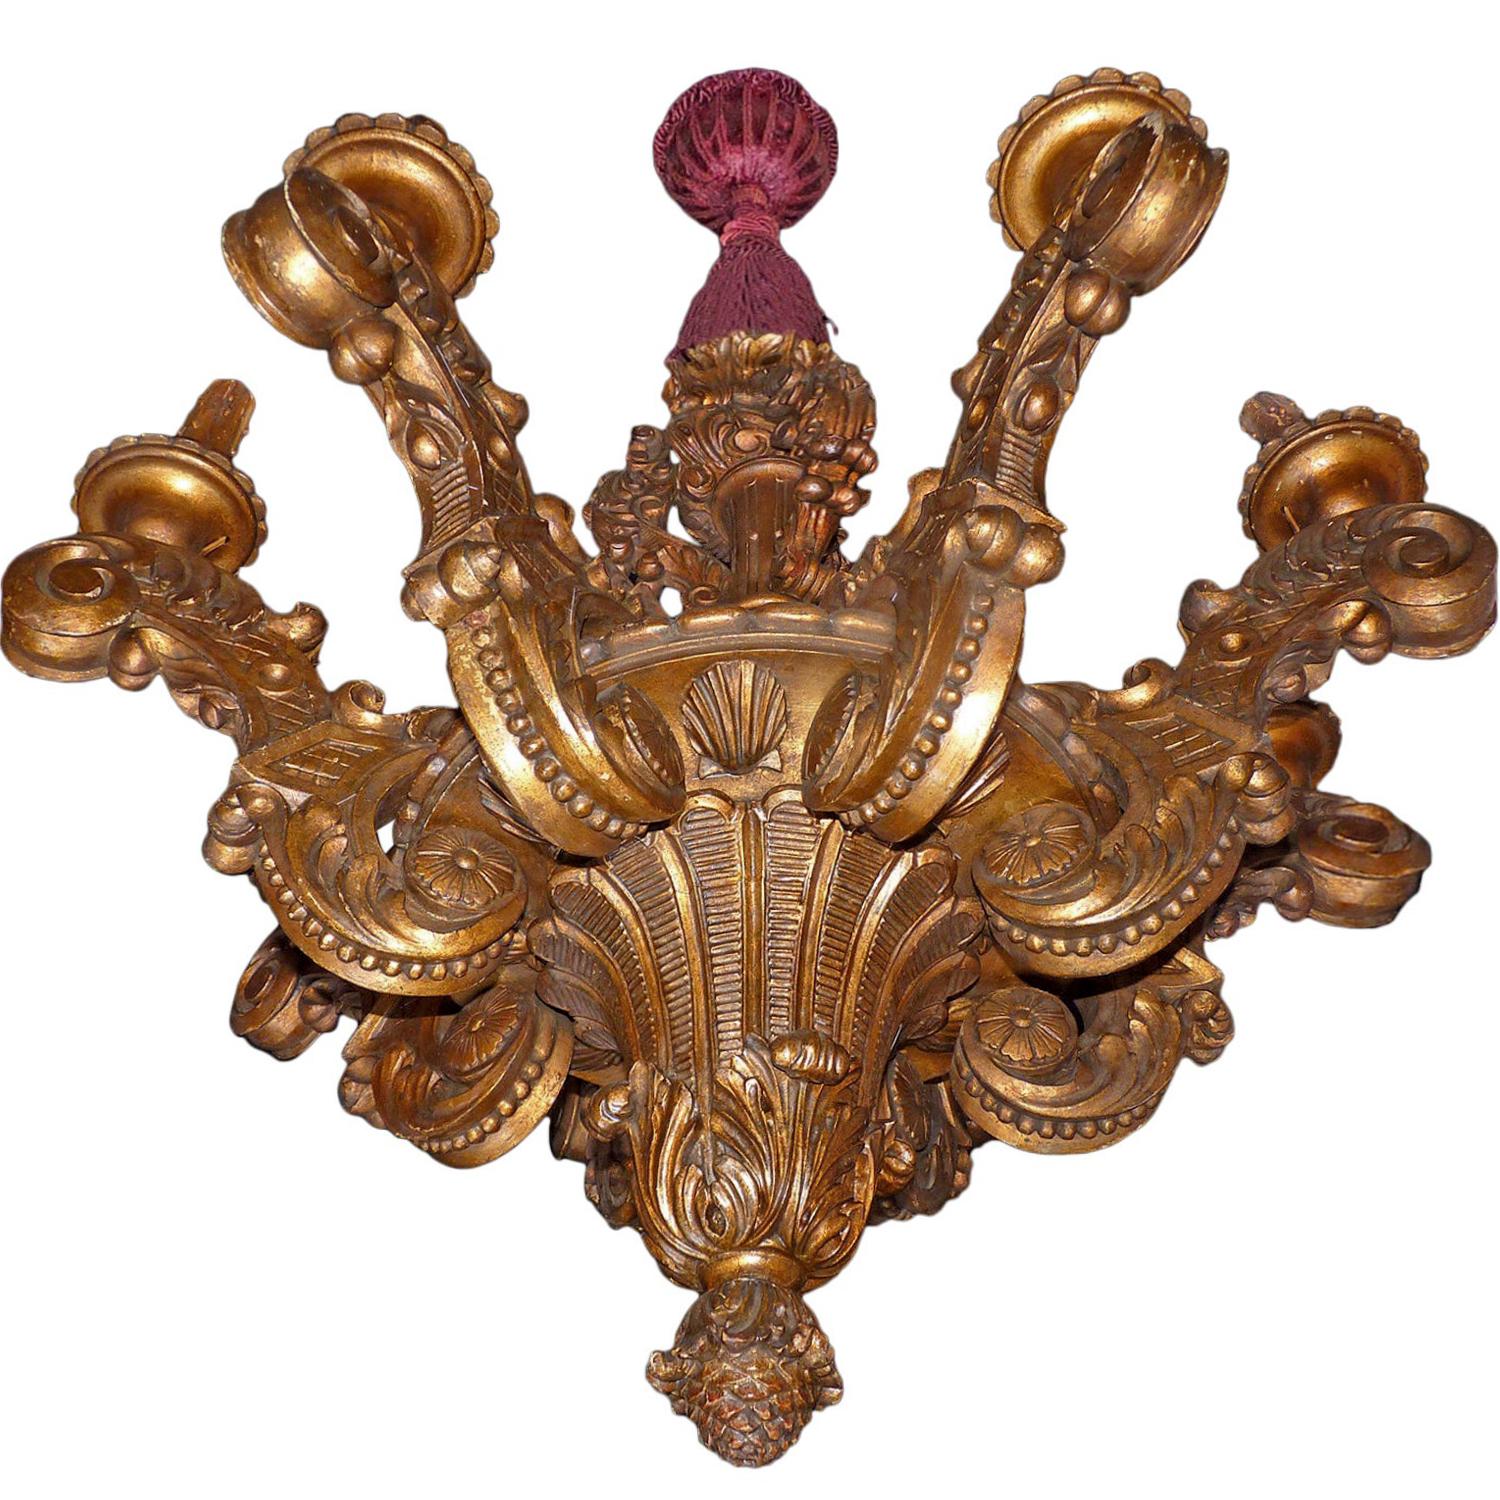 Massive wood carved gold leaf Baroque 8-light giltwood chandelier. The scrolled arms have foliate embellishment pincered to a gadrooned central knop. Adorned with foliate baluster stem above and fruiting drop-finial below.

Measures:
Diameter 40 in/